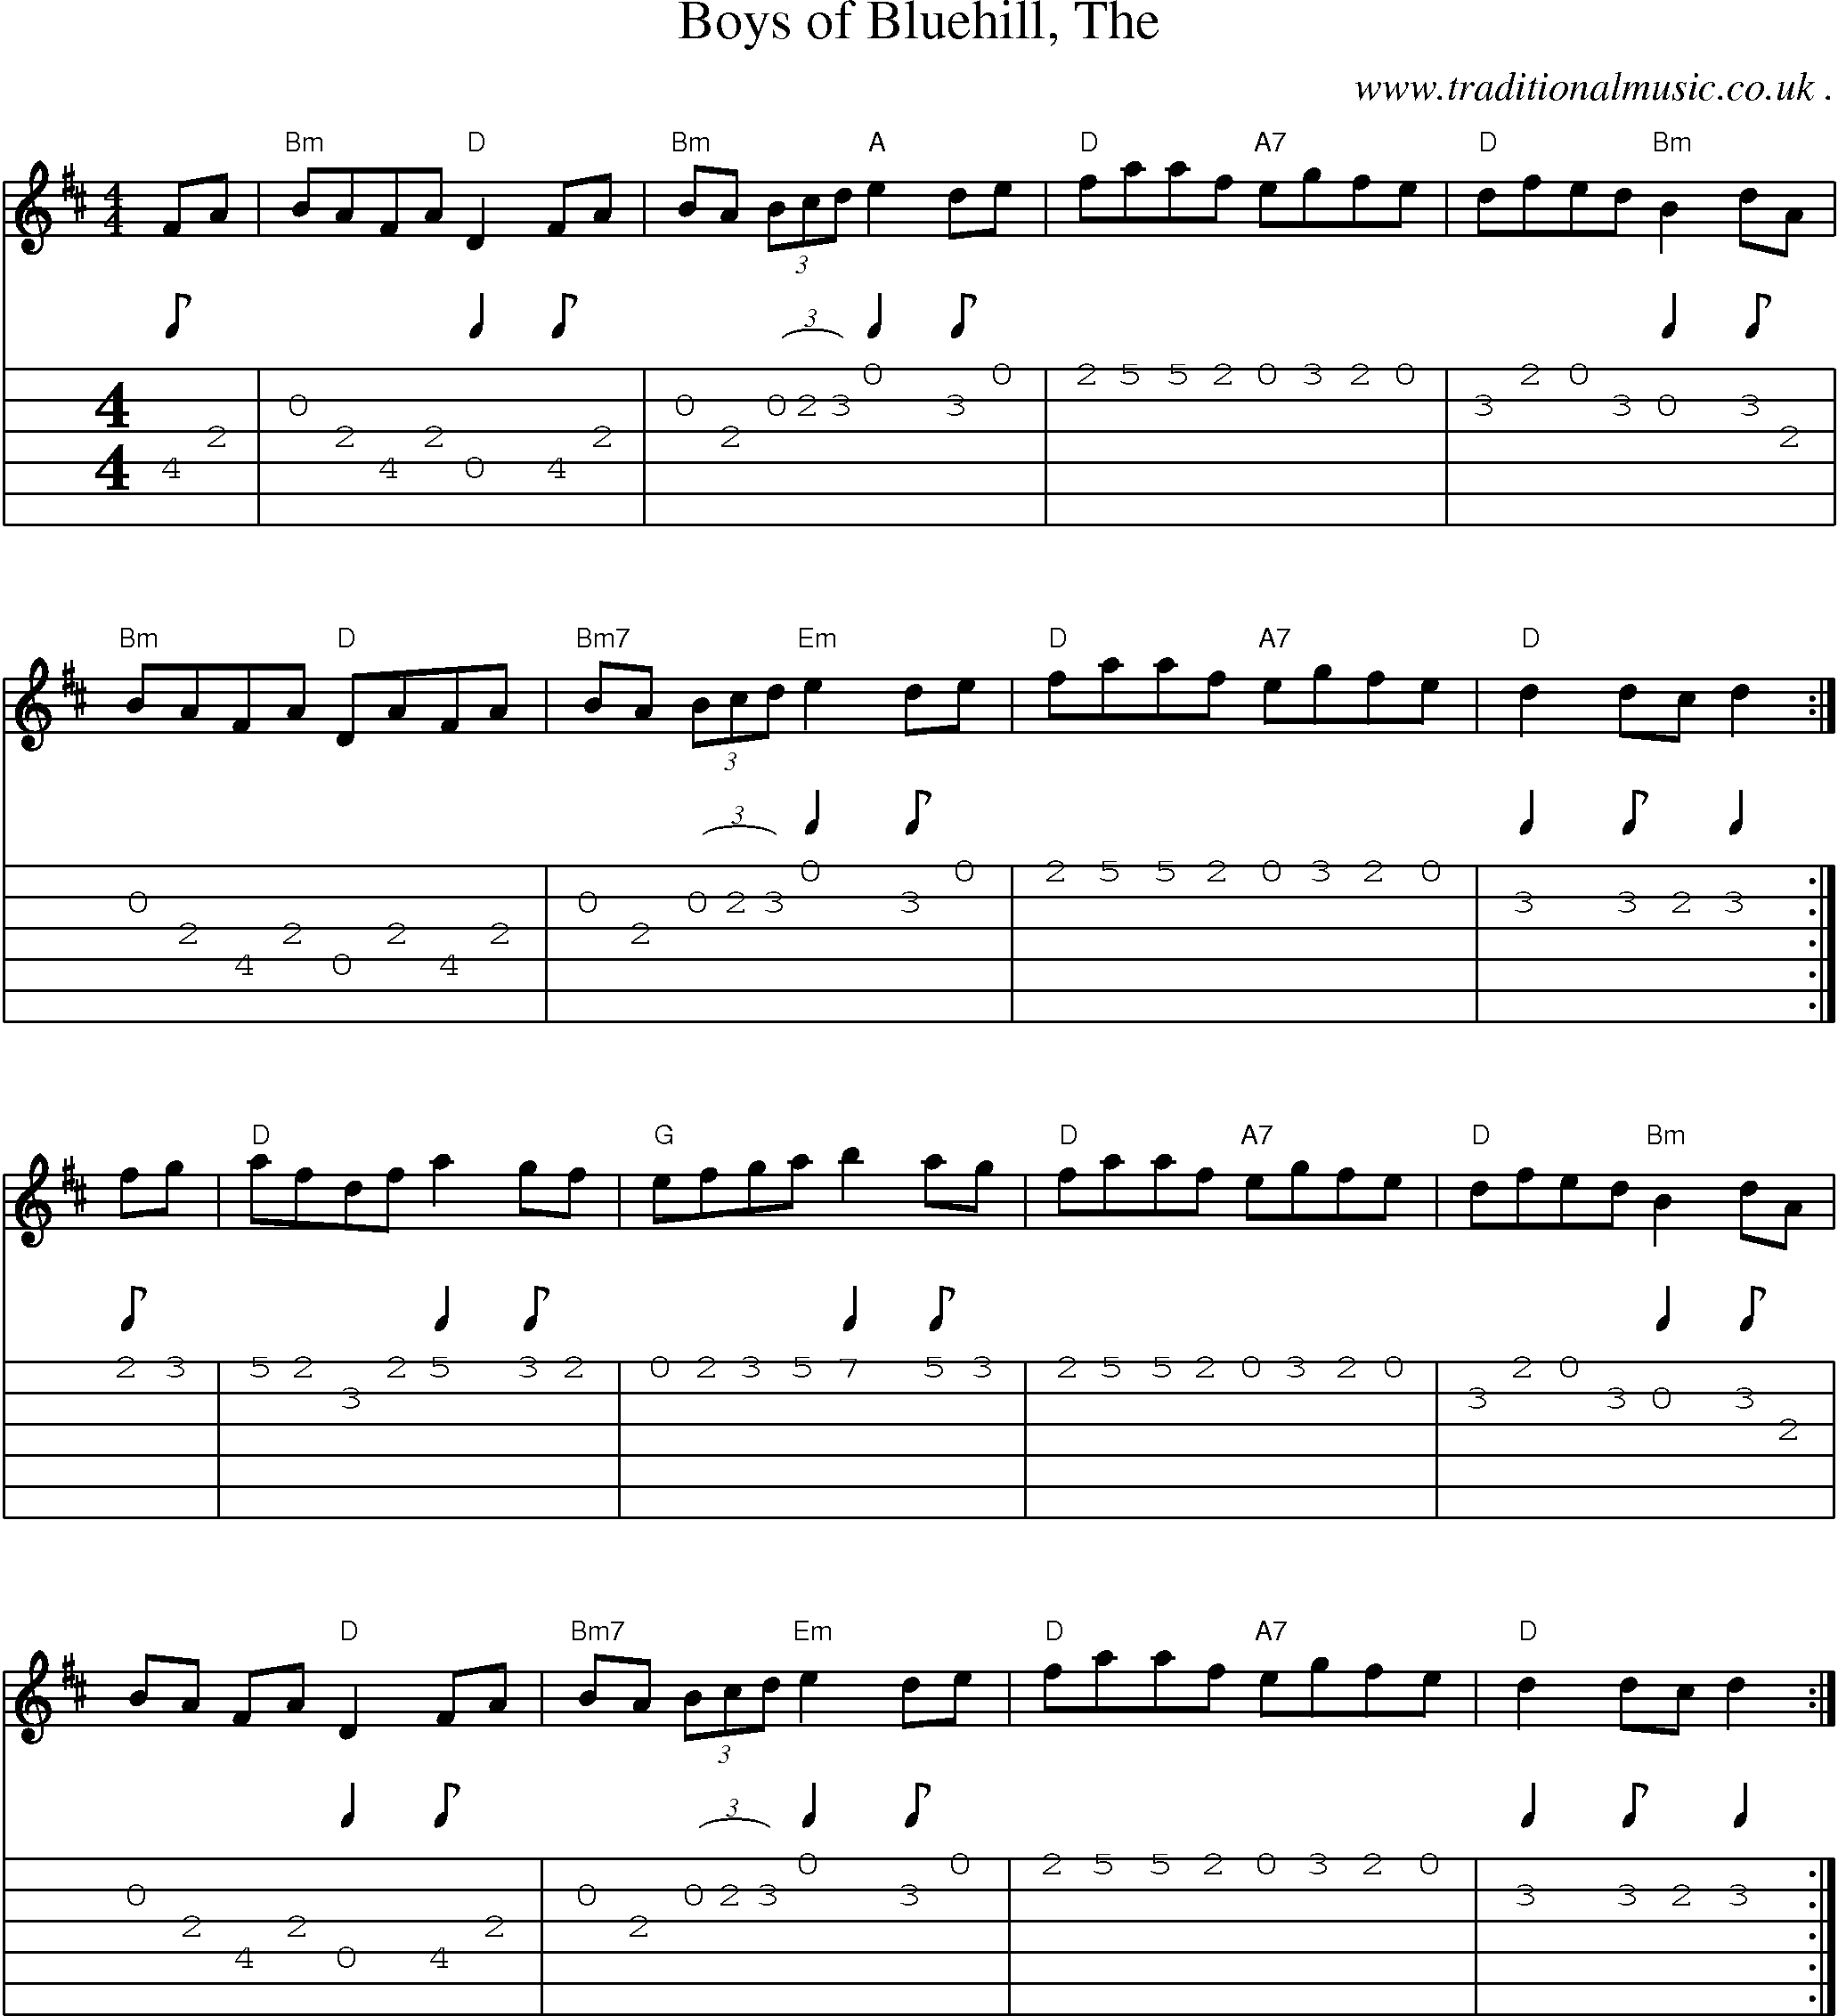 Music Score and Guitar Tabs for Boys Of Bluehill The